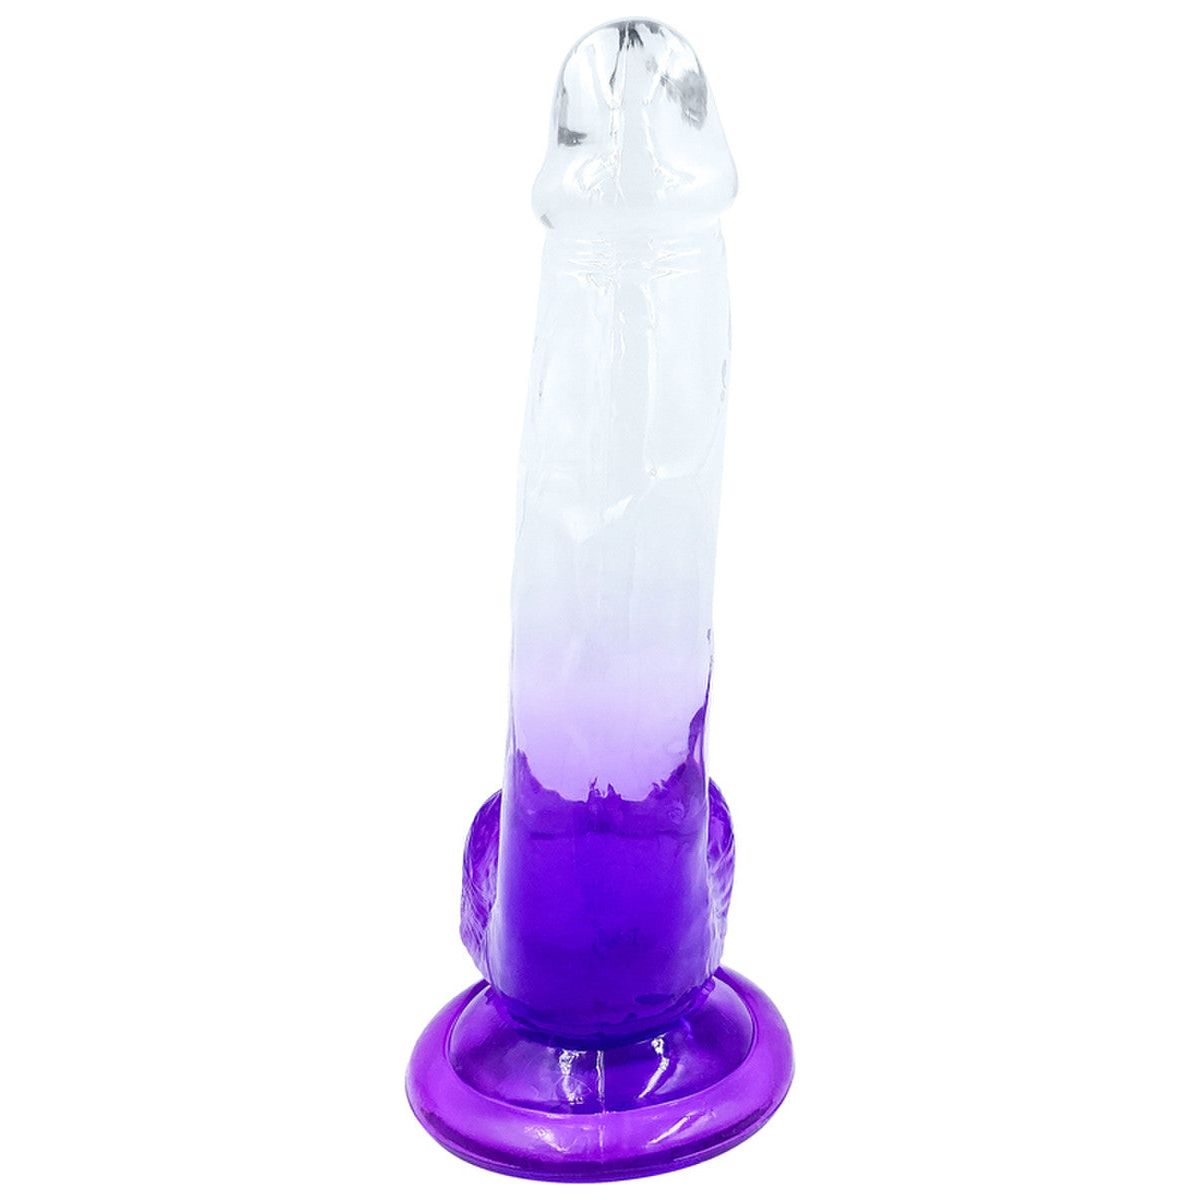 Playful Riders 8in Cock with Balls Purple